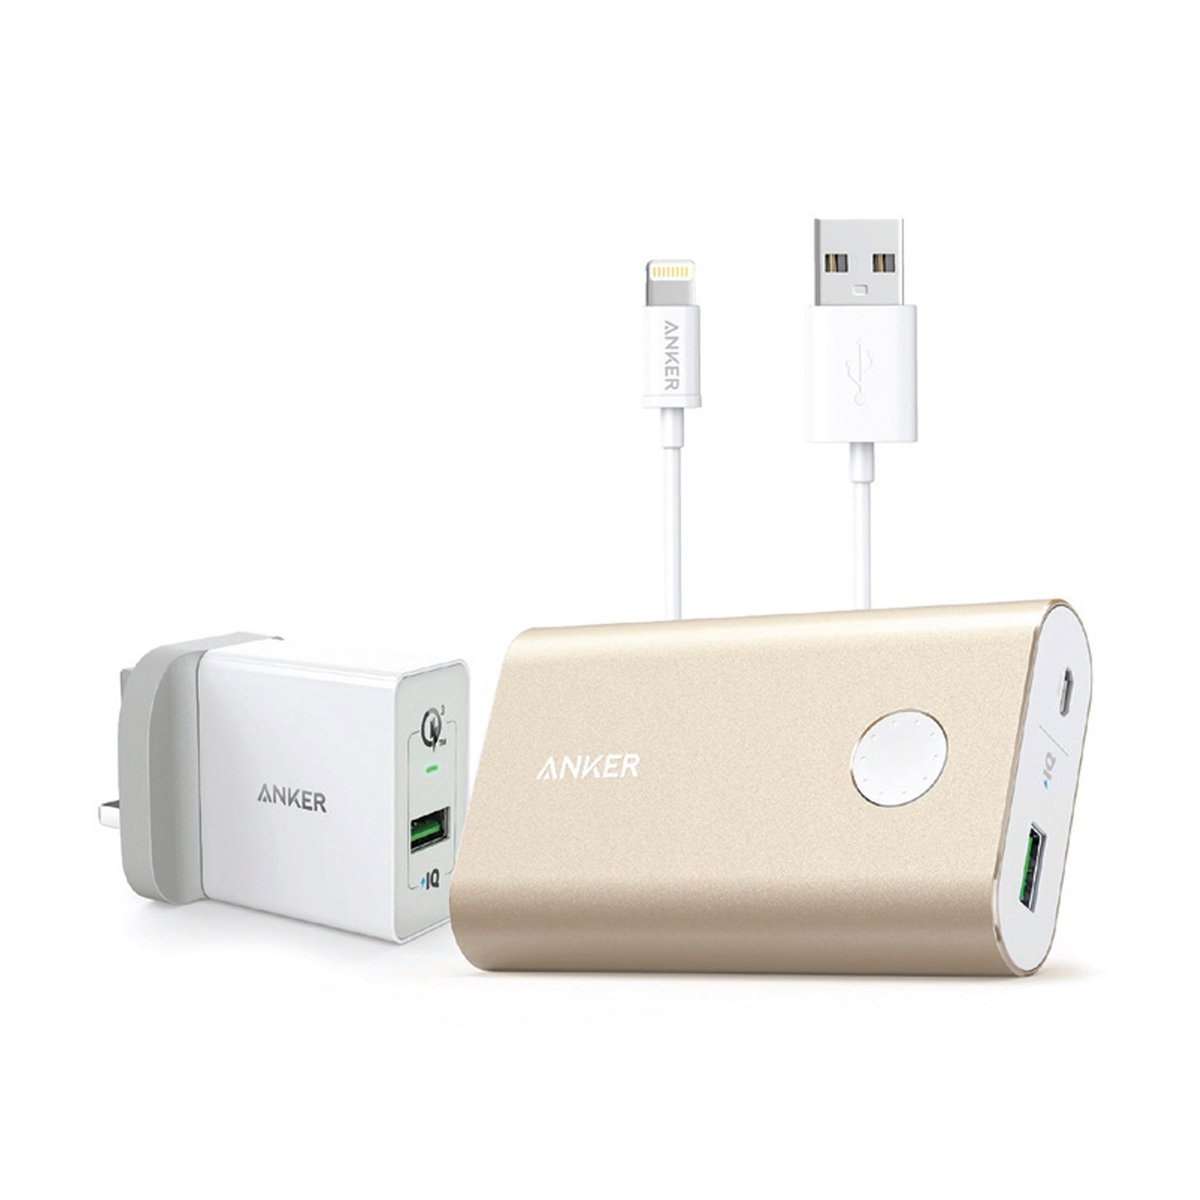 Anker Powerbank 10050mAh+Lightning Cable+ Charger